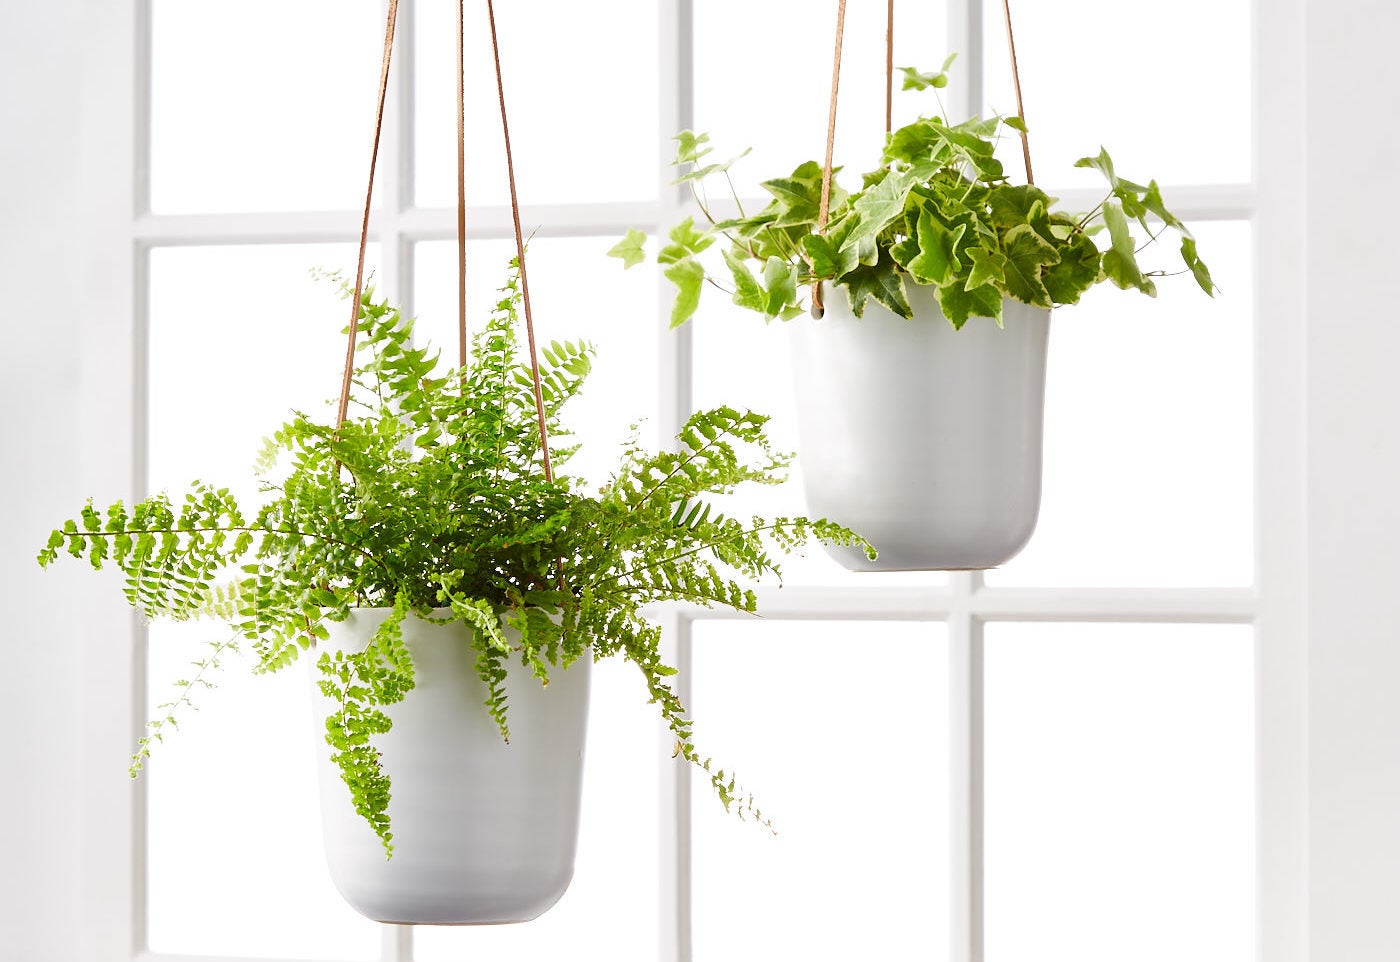 How To Care for Hanging Plants   Hanging Plant Care   Plants.com